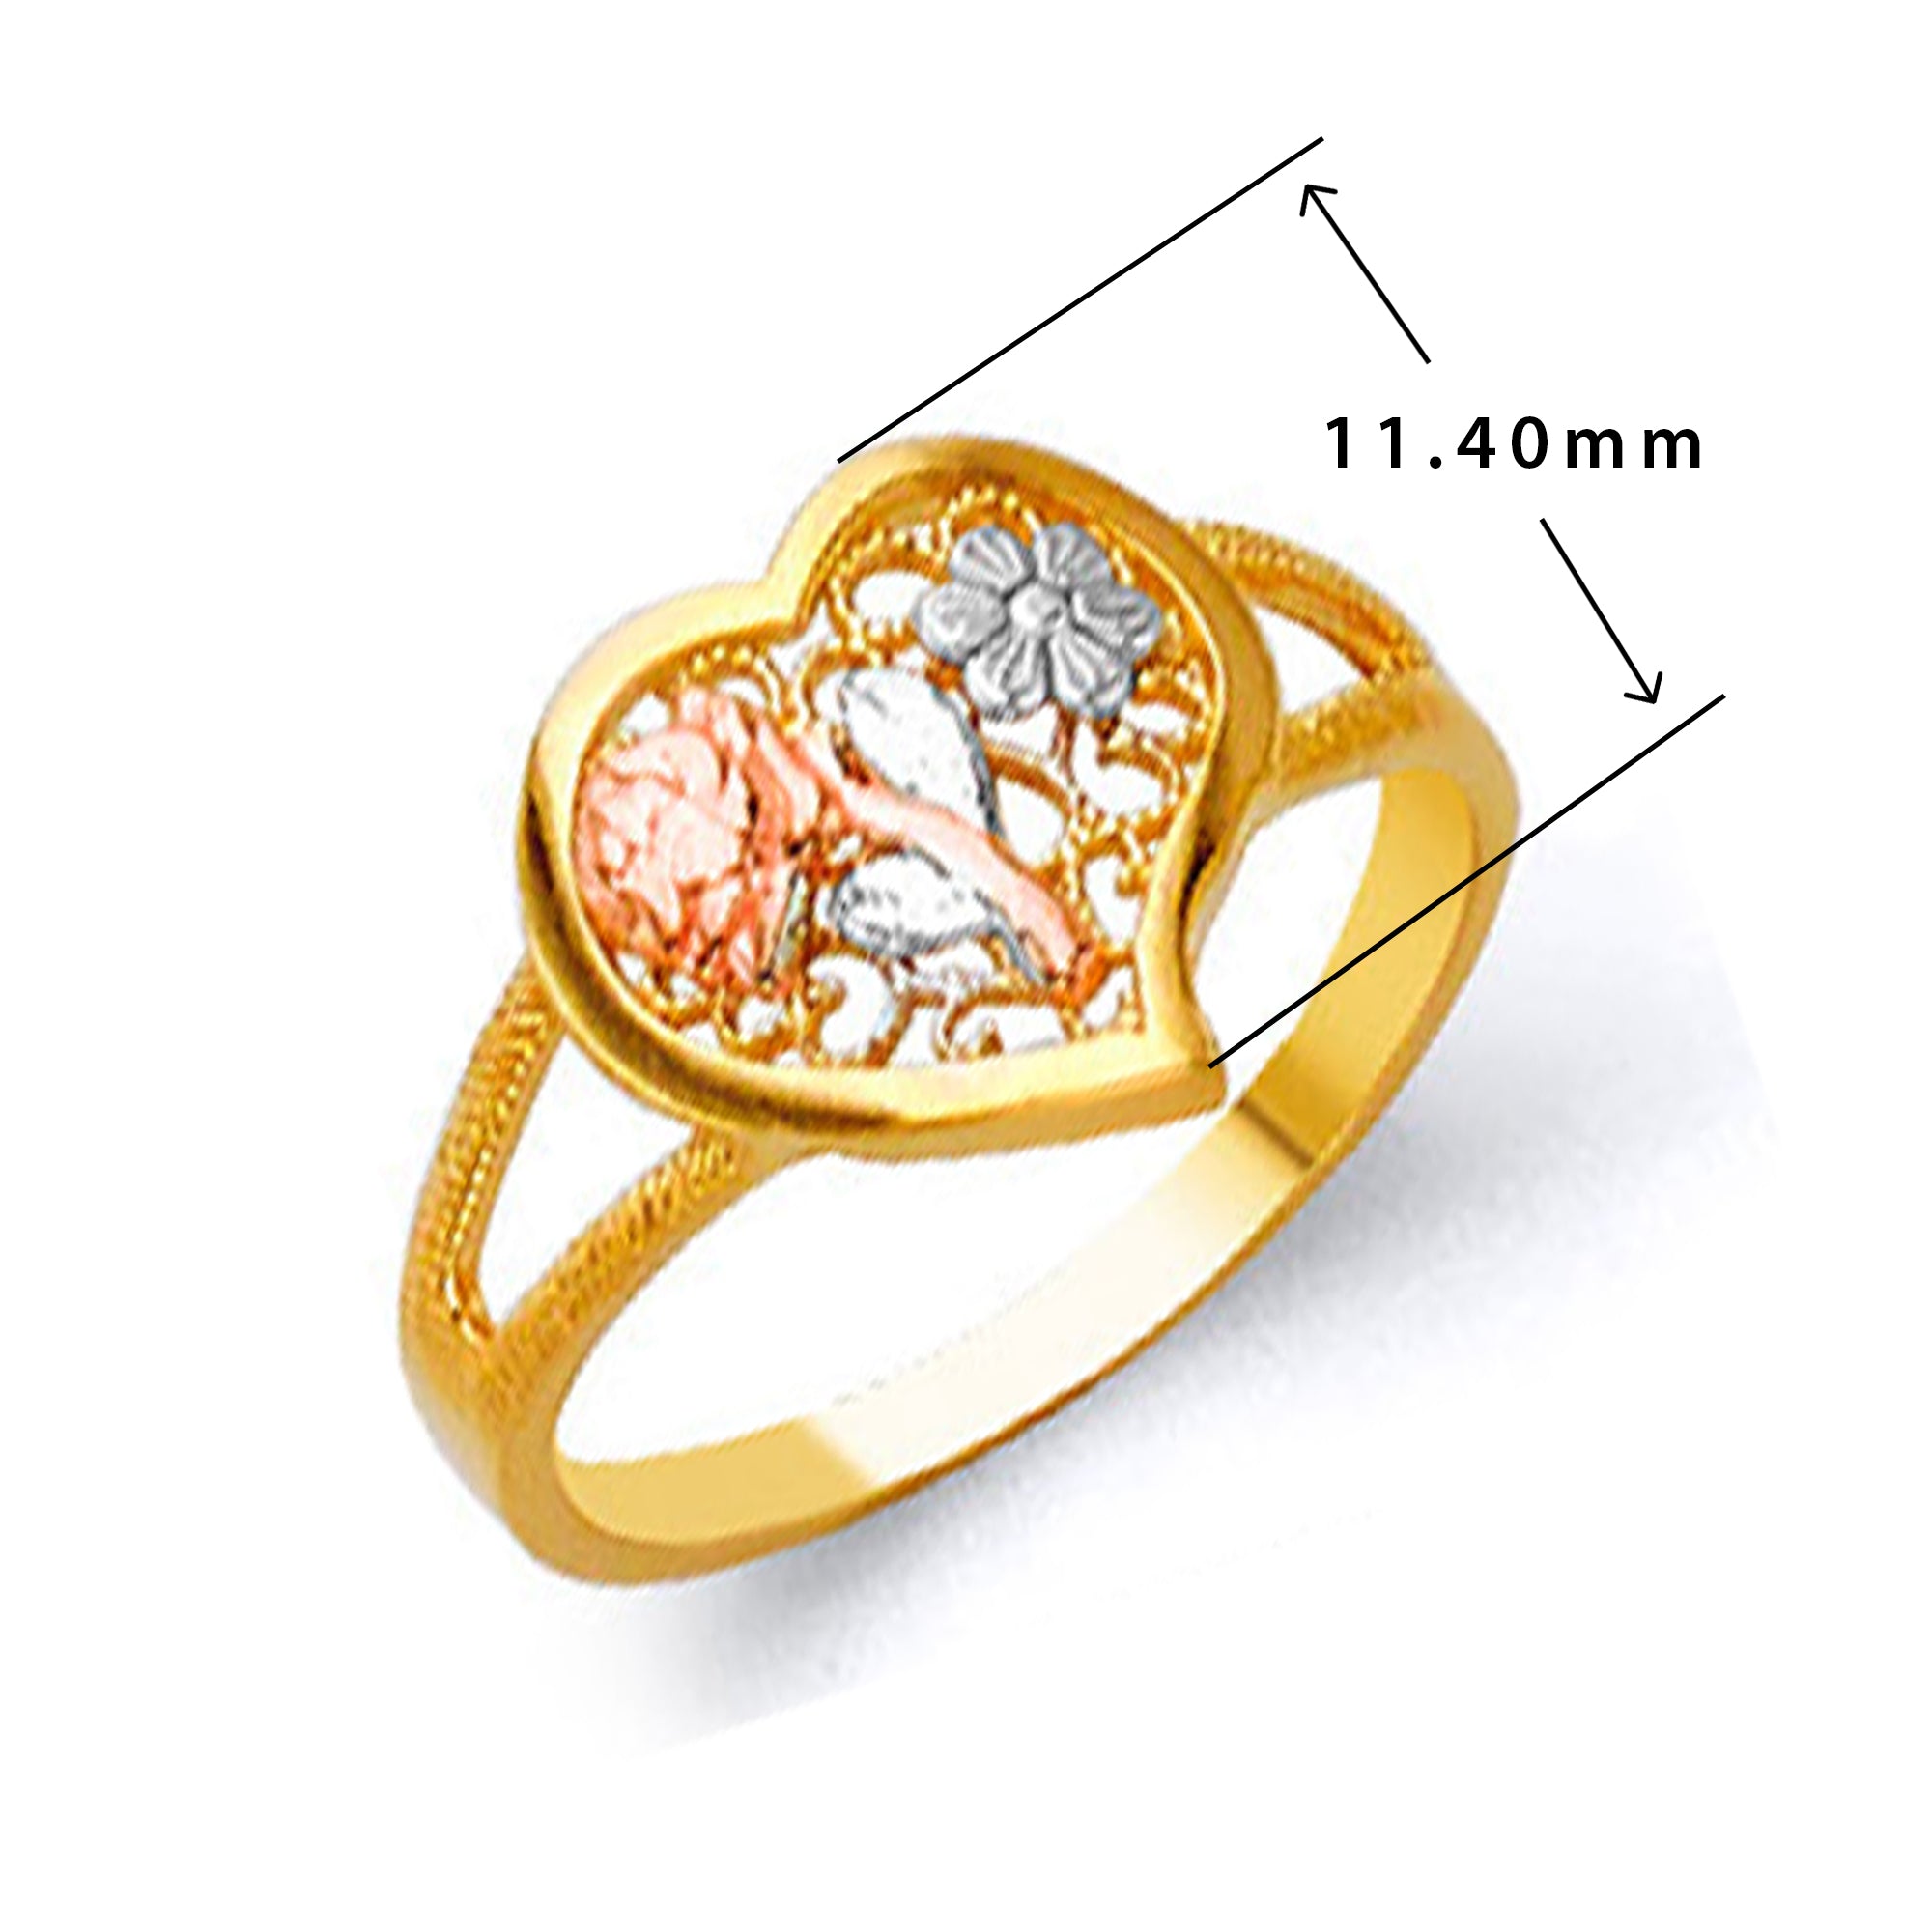 Floral Motif Heart Ring in Solid Gold with Measurement